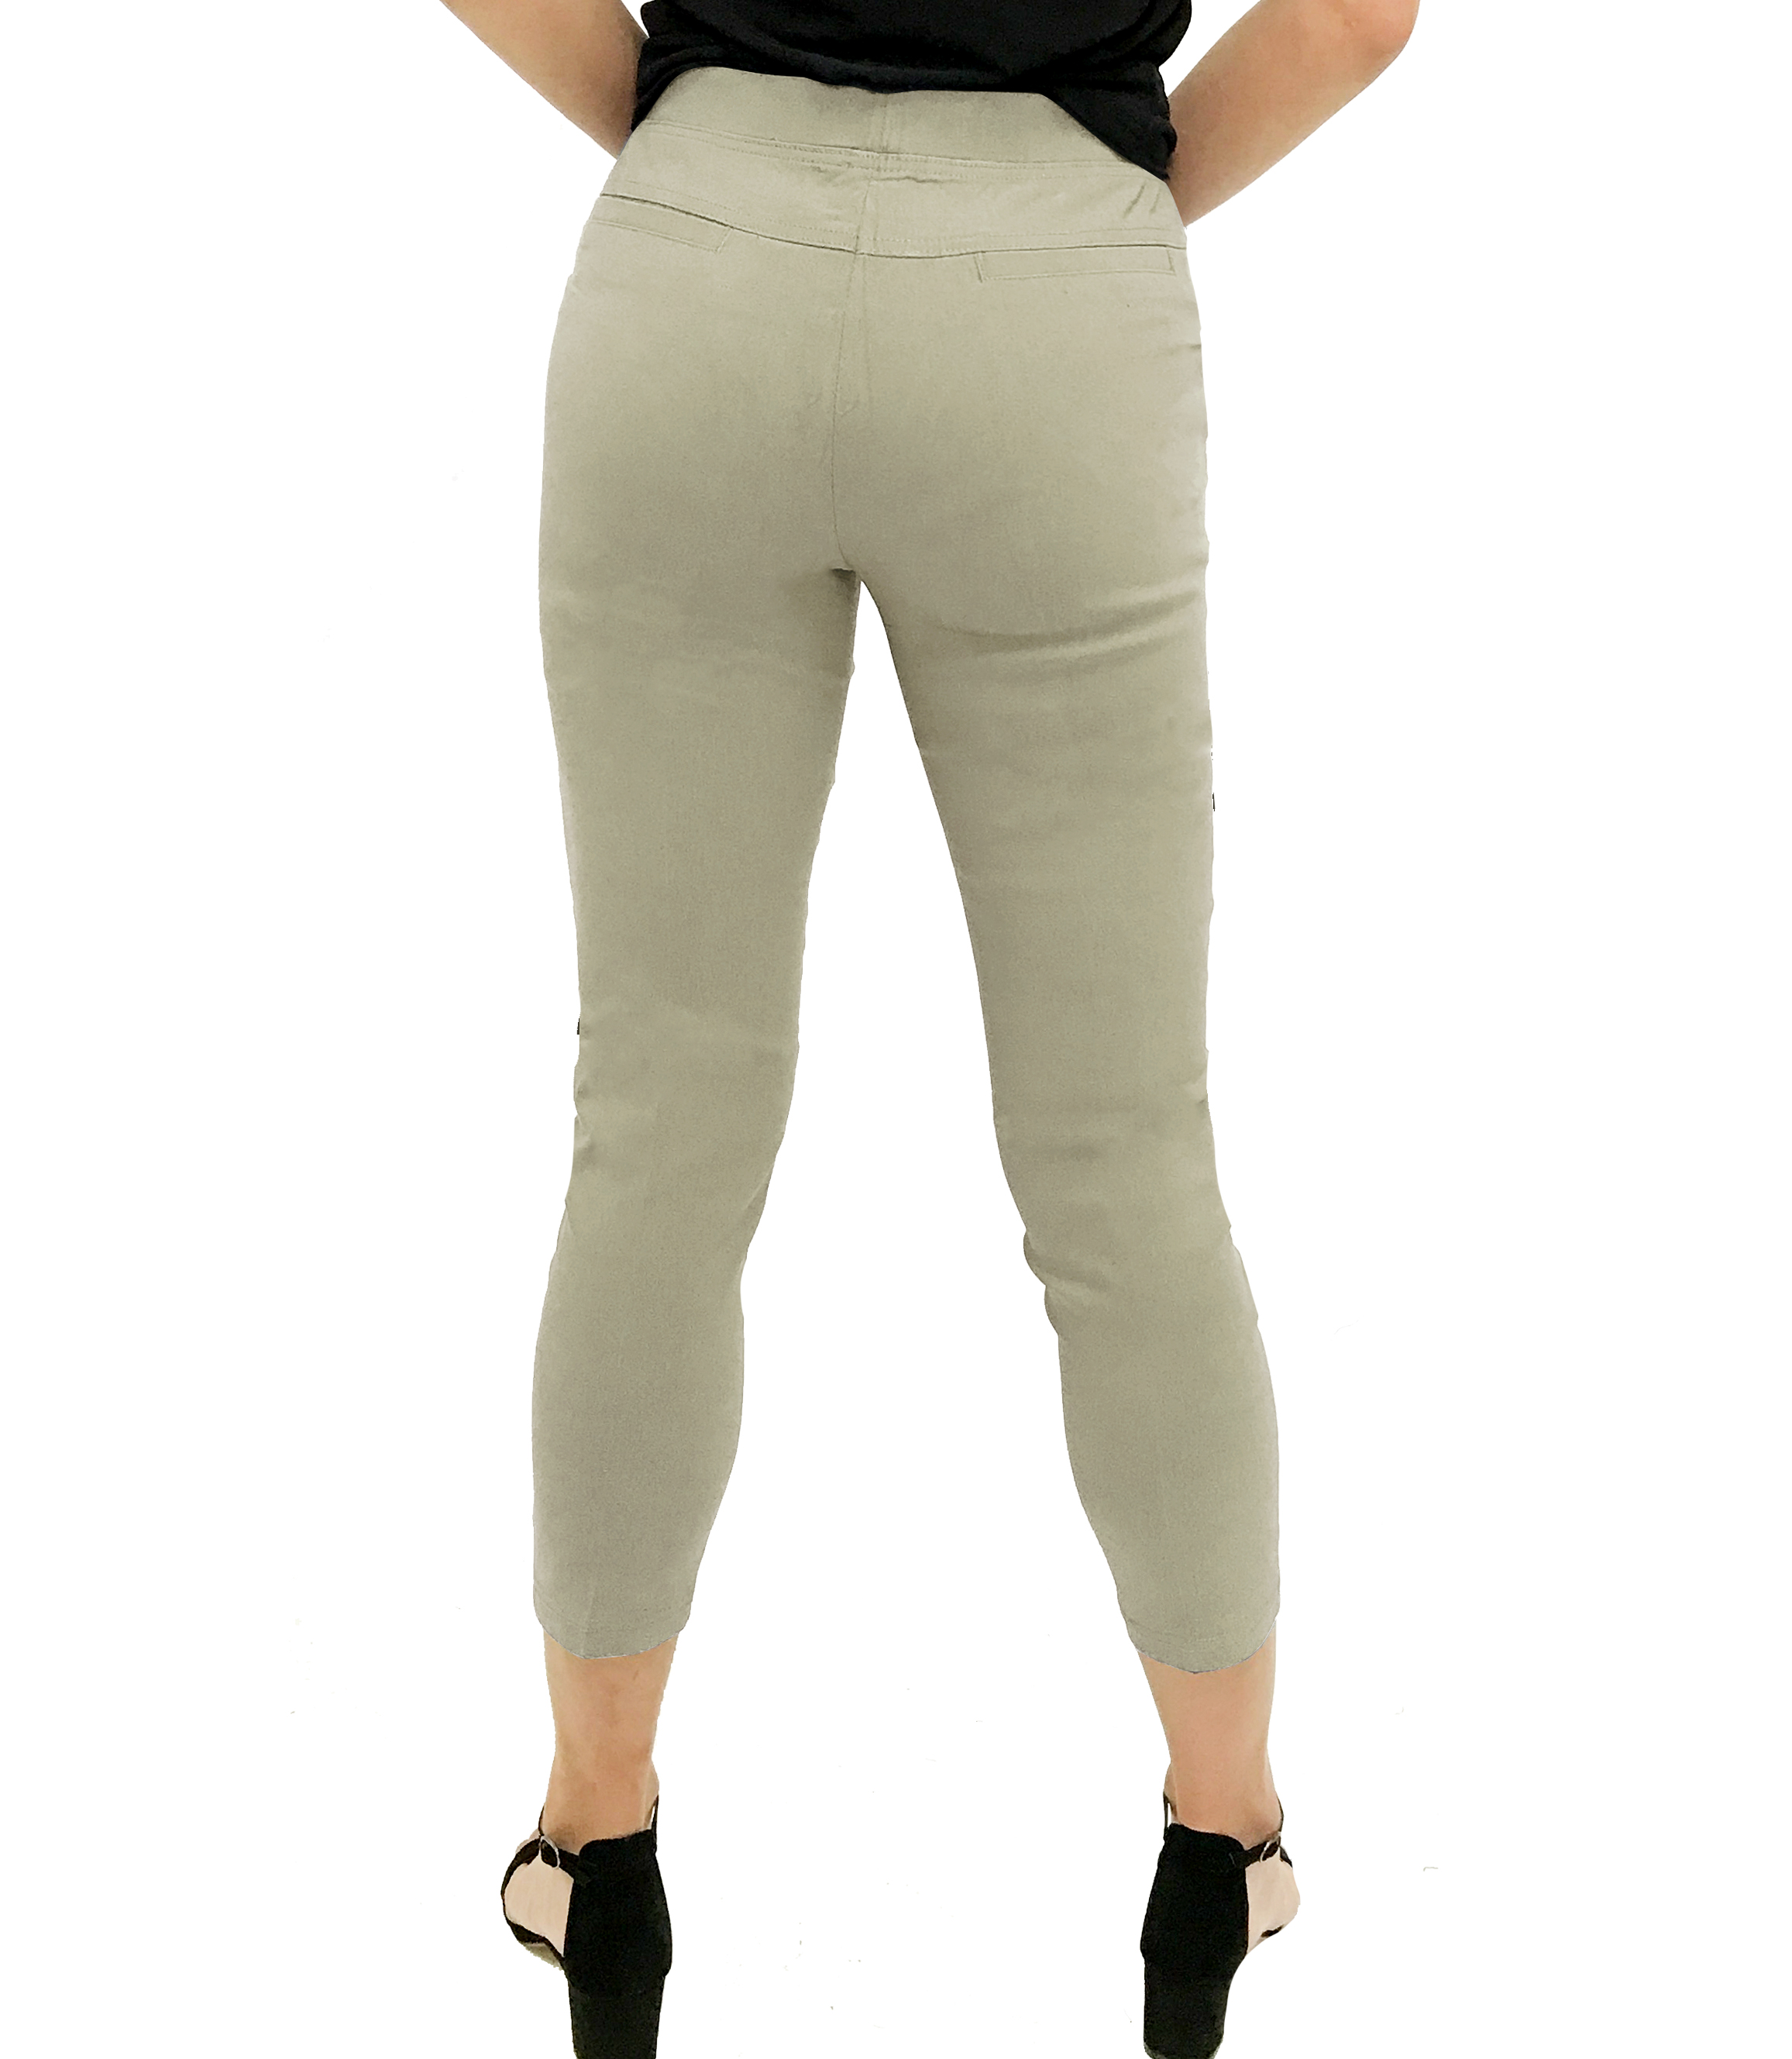 JOLIE BEIGE ANKLE GRAZER STRETCH PANTS | Rosella - Style inspired by ...